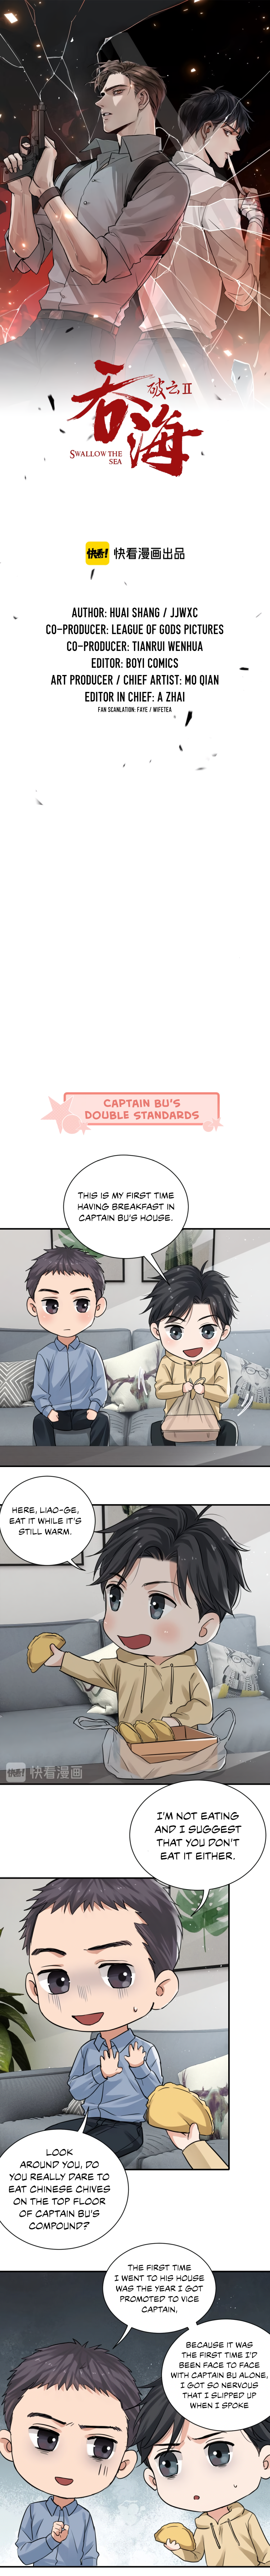 Breaking Through The Clouds 2: Swallow The Sea Chapter 19.5: Extra: Captain Bu's Double Standards - Picture 1